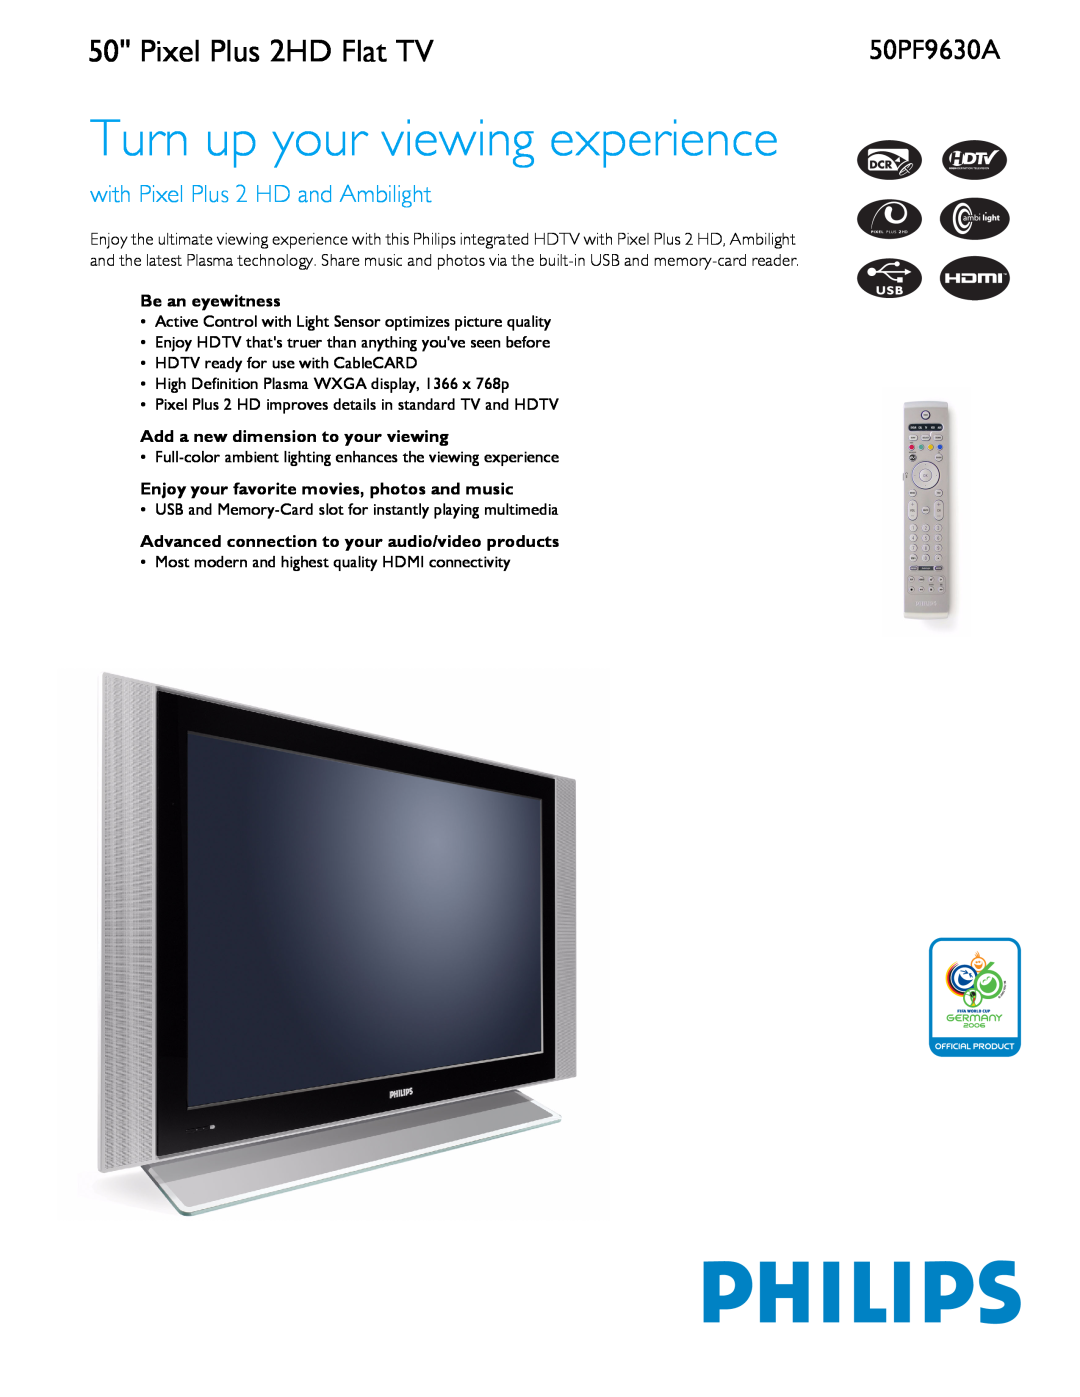 Philips 50PF9630A manual Pixel Plus 2HD Flat TV, Be an eyewitness, Add a new dimension to your viewing 